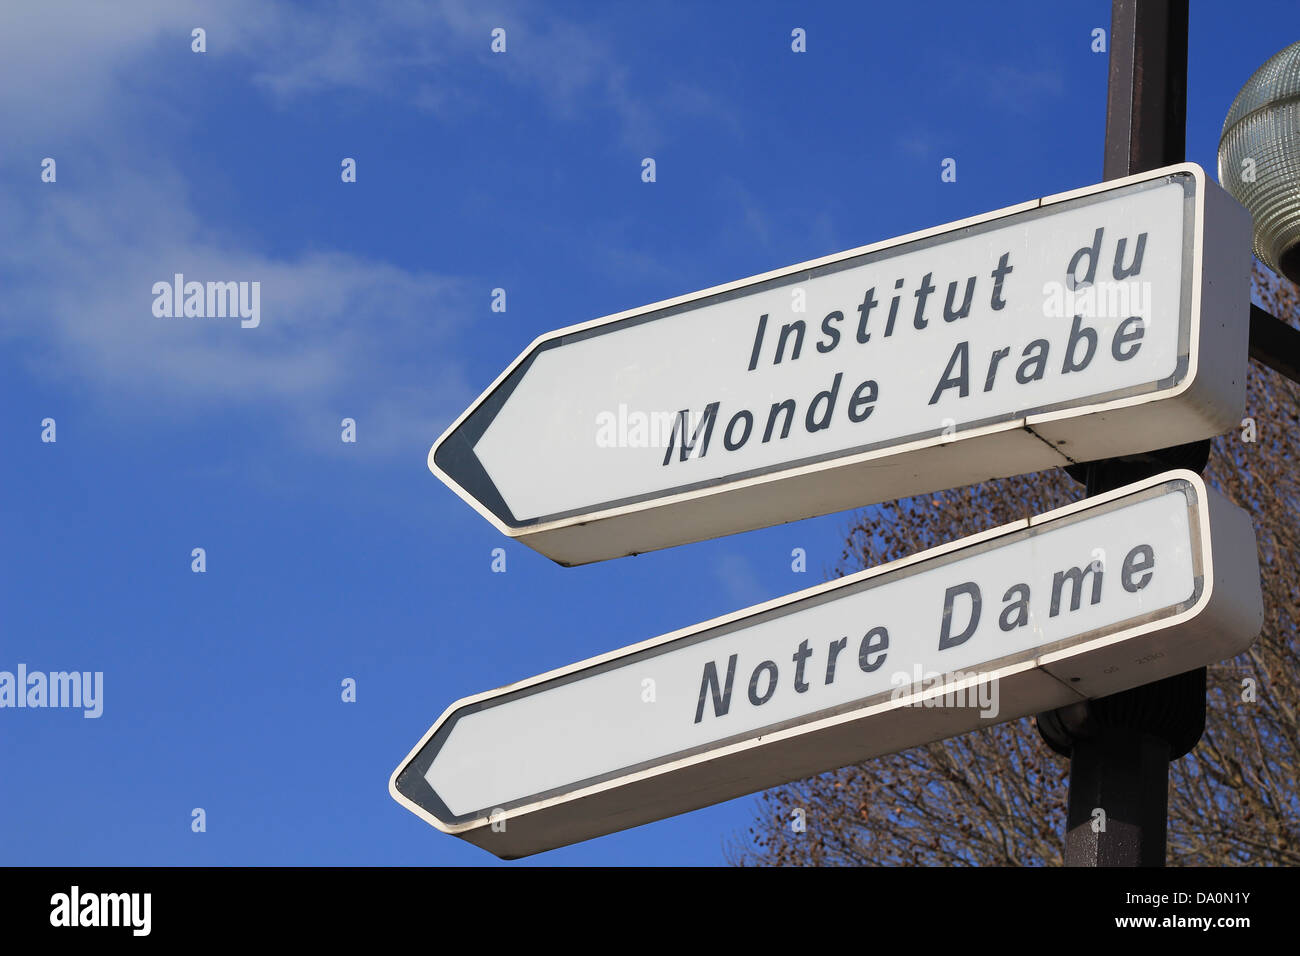 Street signpost indicating direction to Notre-Dame cathedral and Institut du Monde Arabe Stock Photo